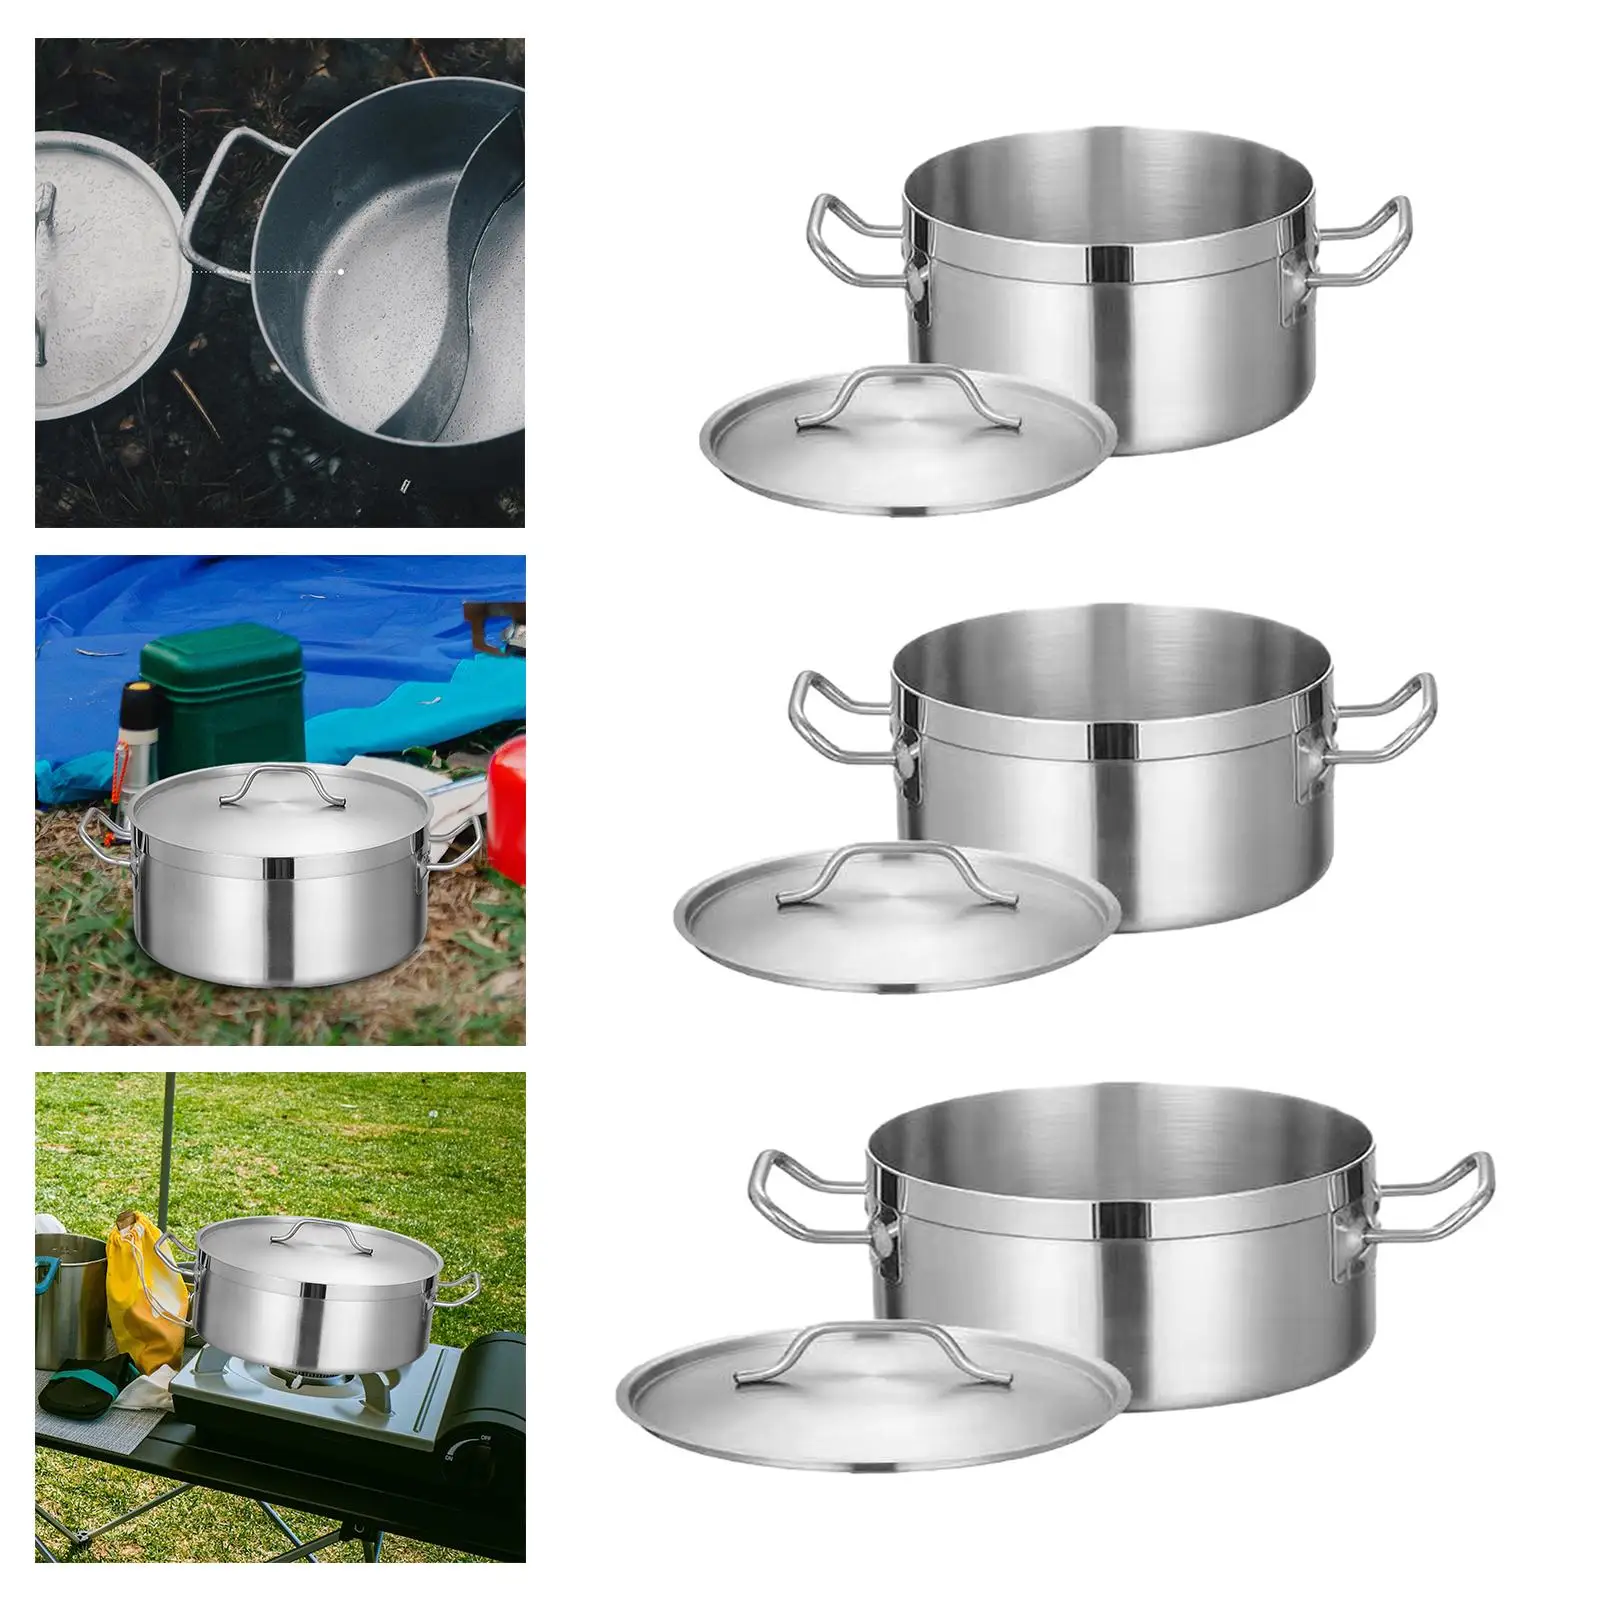 Stainless Steel Stockpot with Lid Heavy Duty Small Double Handles Induction Pot for Commercial Outdoor Kitchen Camping Household